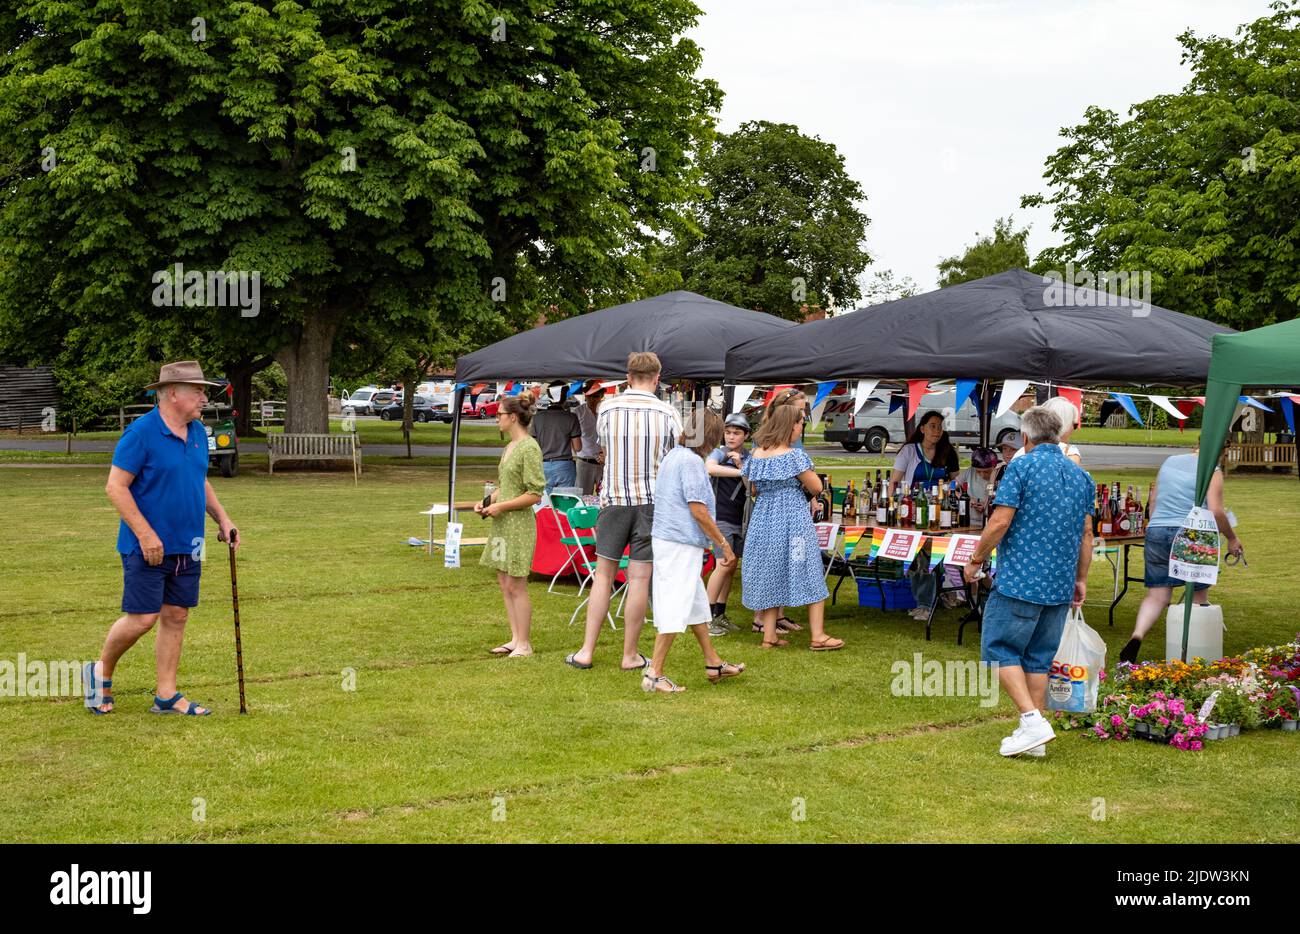 The tombola stall at a traditional English village fete Stock Photo